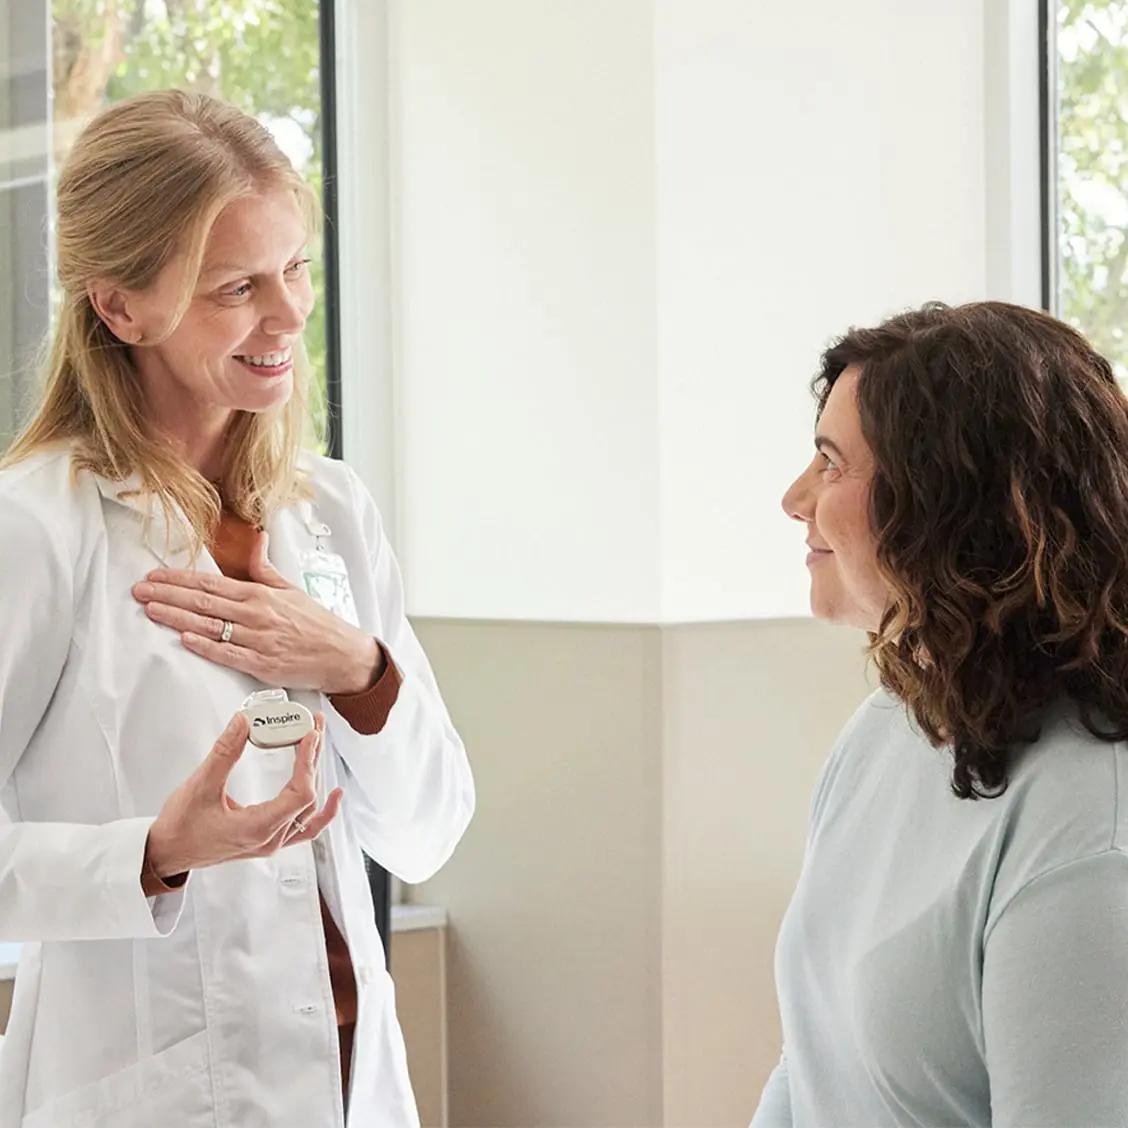 The image shows two women engaged in a conversation about the Inspire Implant.